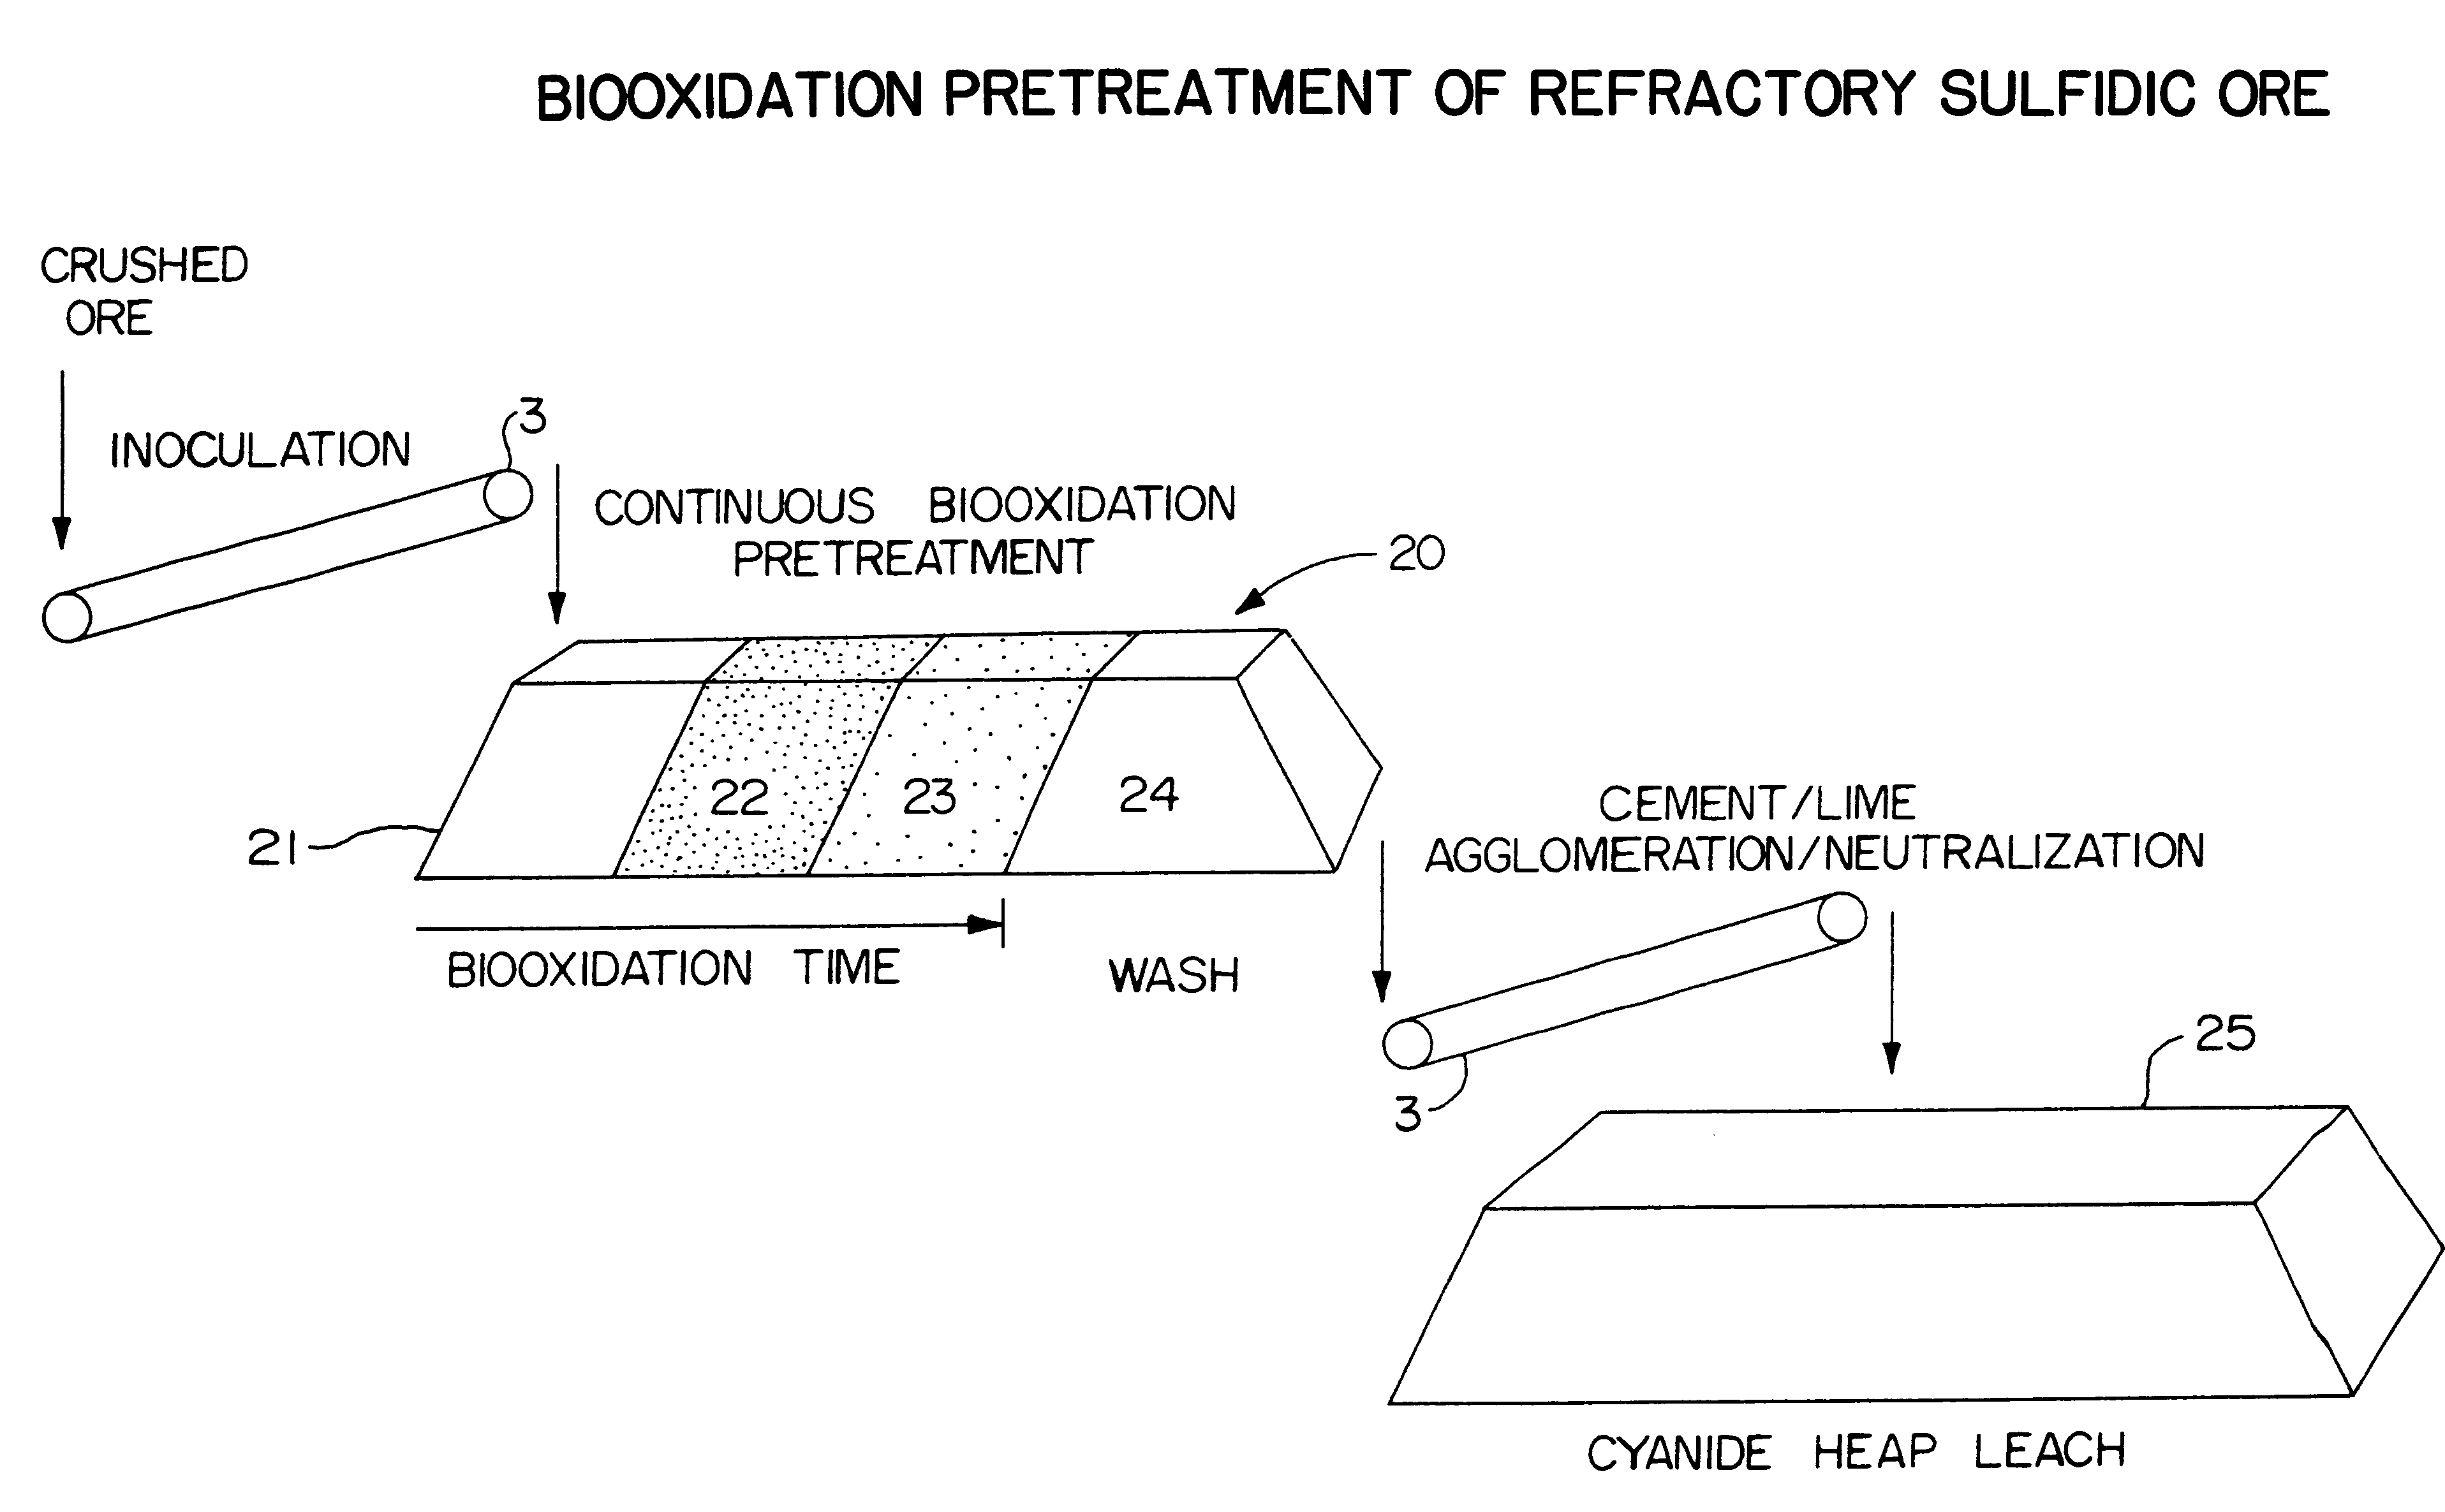 Biooxidation process for recovery of metal values from sulfur-containing ore materials